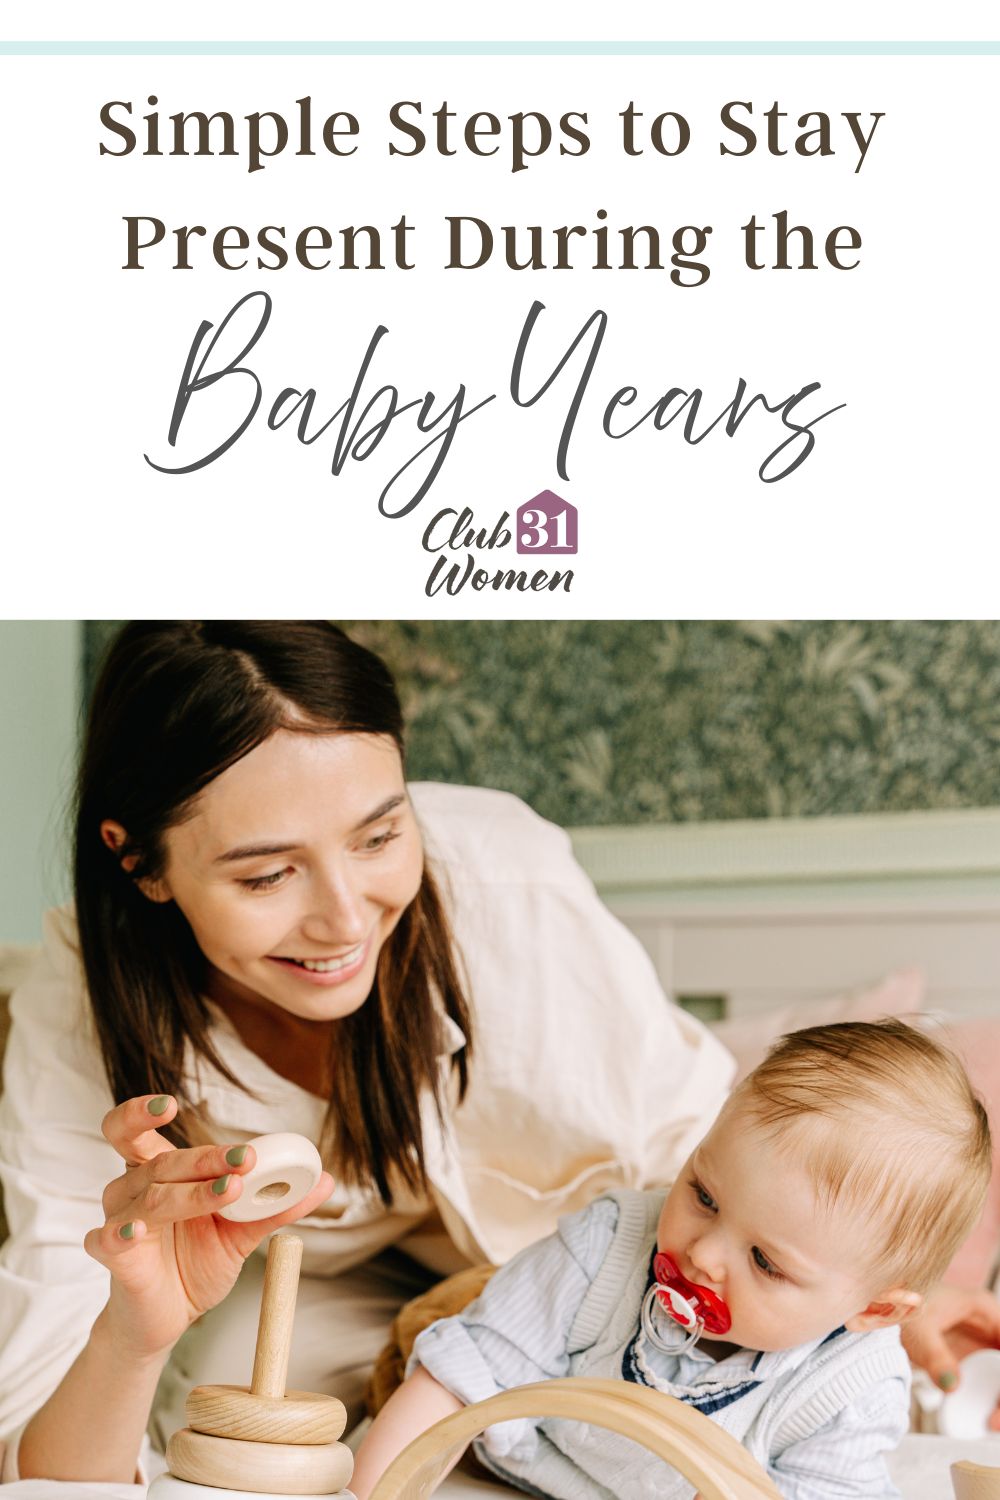 The baby years are years to cherish and be present in. Here are some practical things you can do to stay present and capture the joy. via @Club31Women